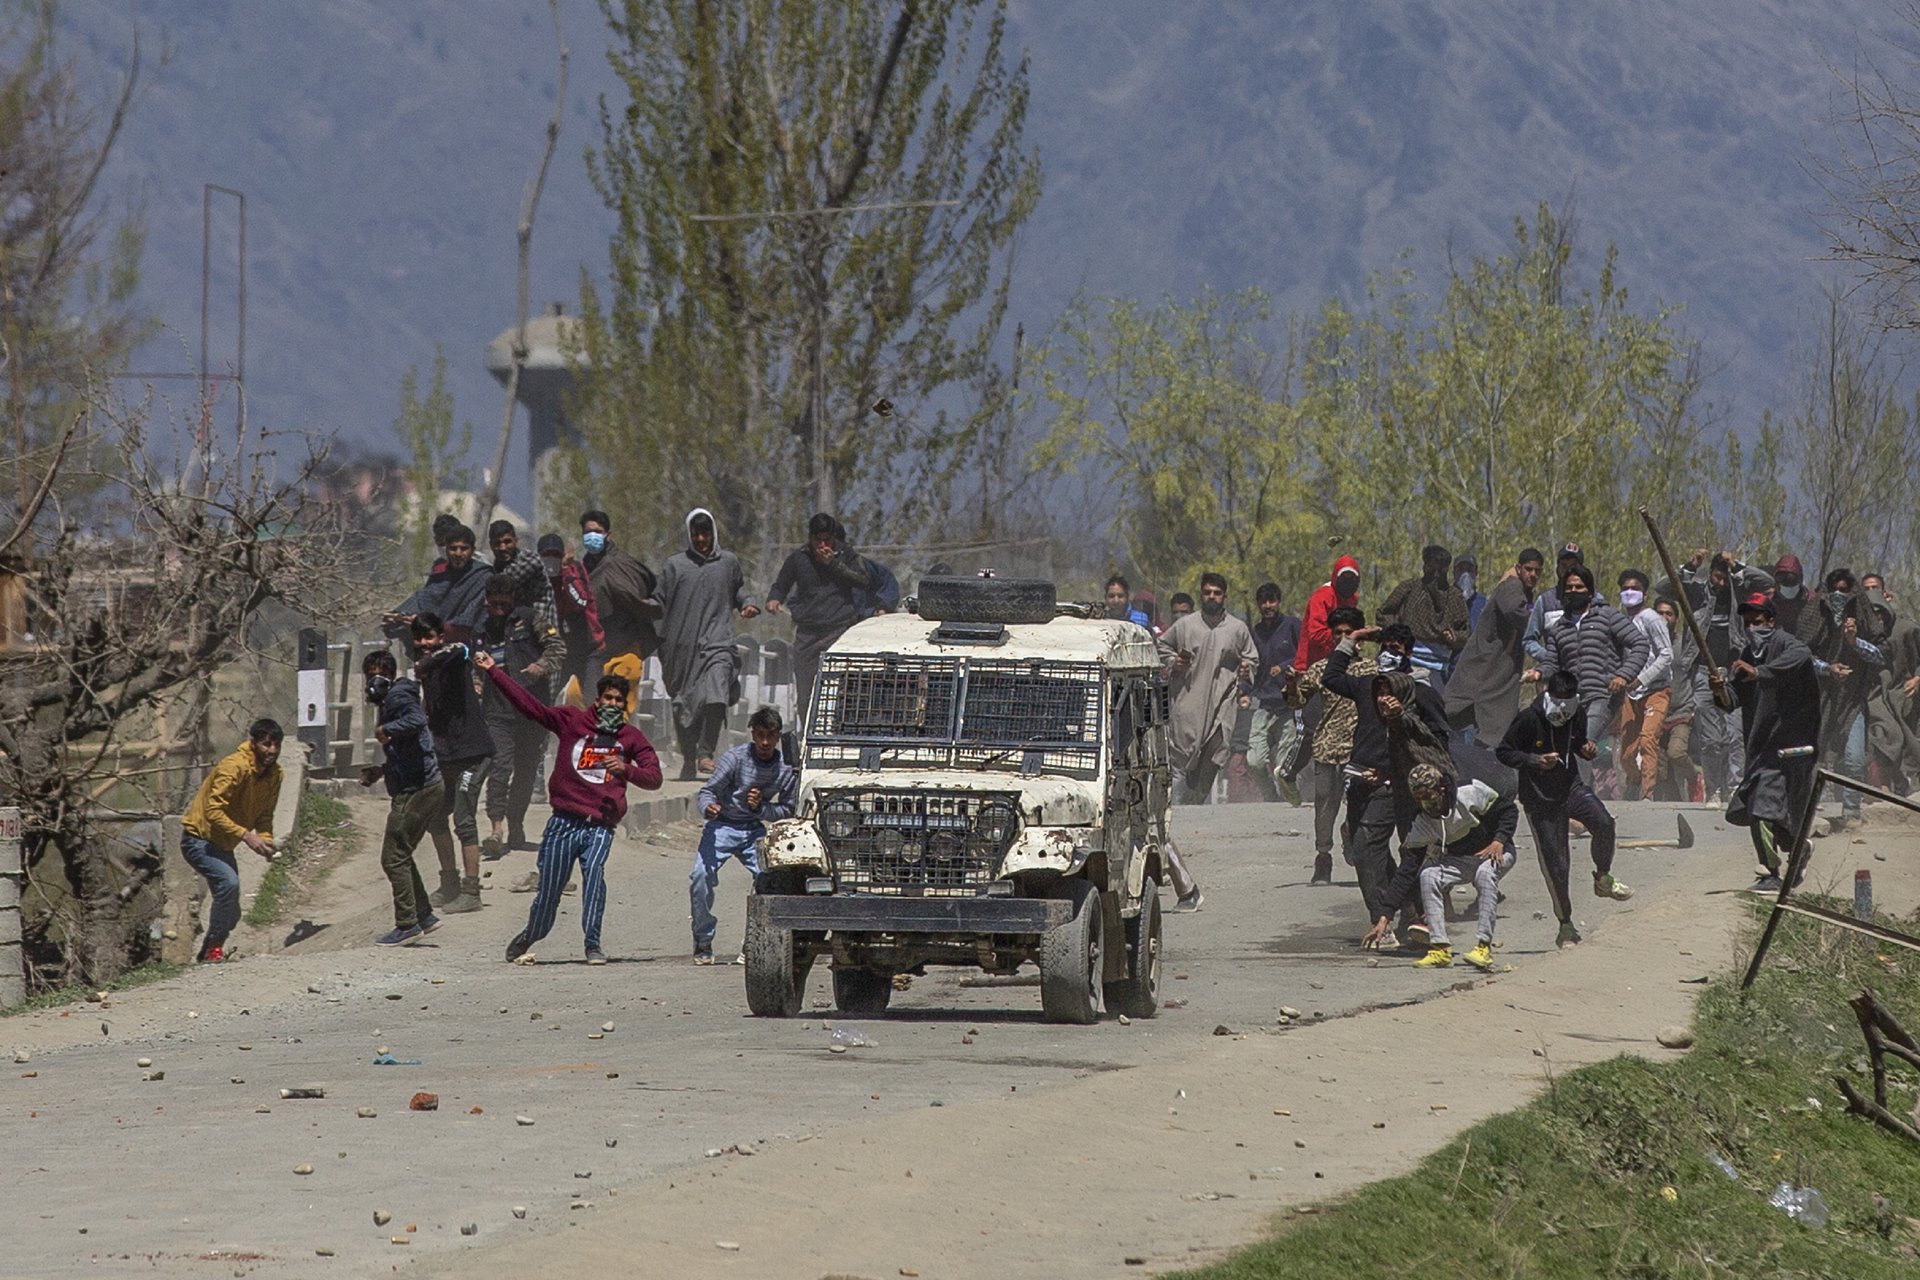 Kashmiri villagers throw stones and bricks at a vehicle belonging to Indian police, during a protest near the site of an earlier gun battle between militants and police in Kakapora, south of Srinagar, in Indian-administered Kashmir.